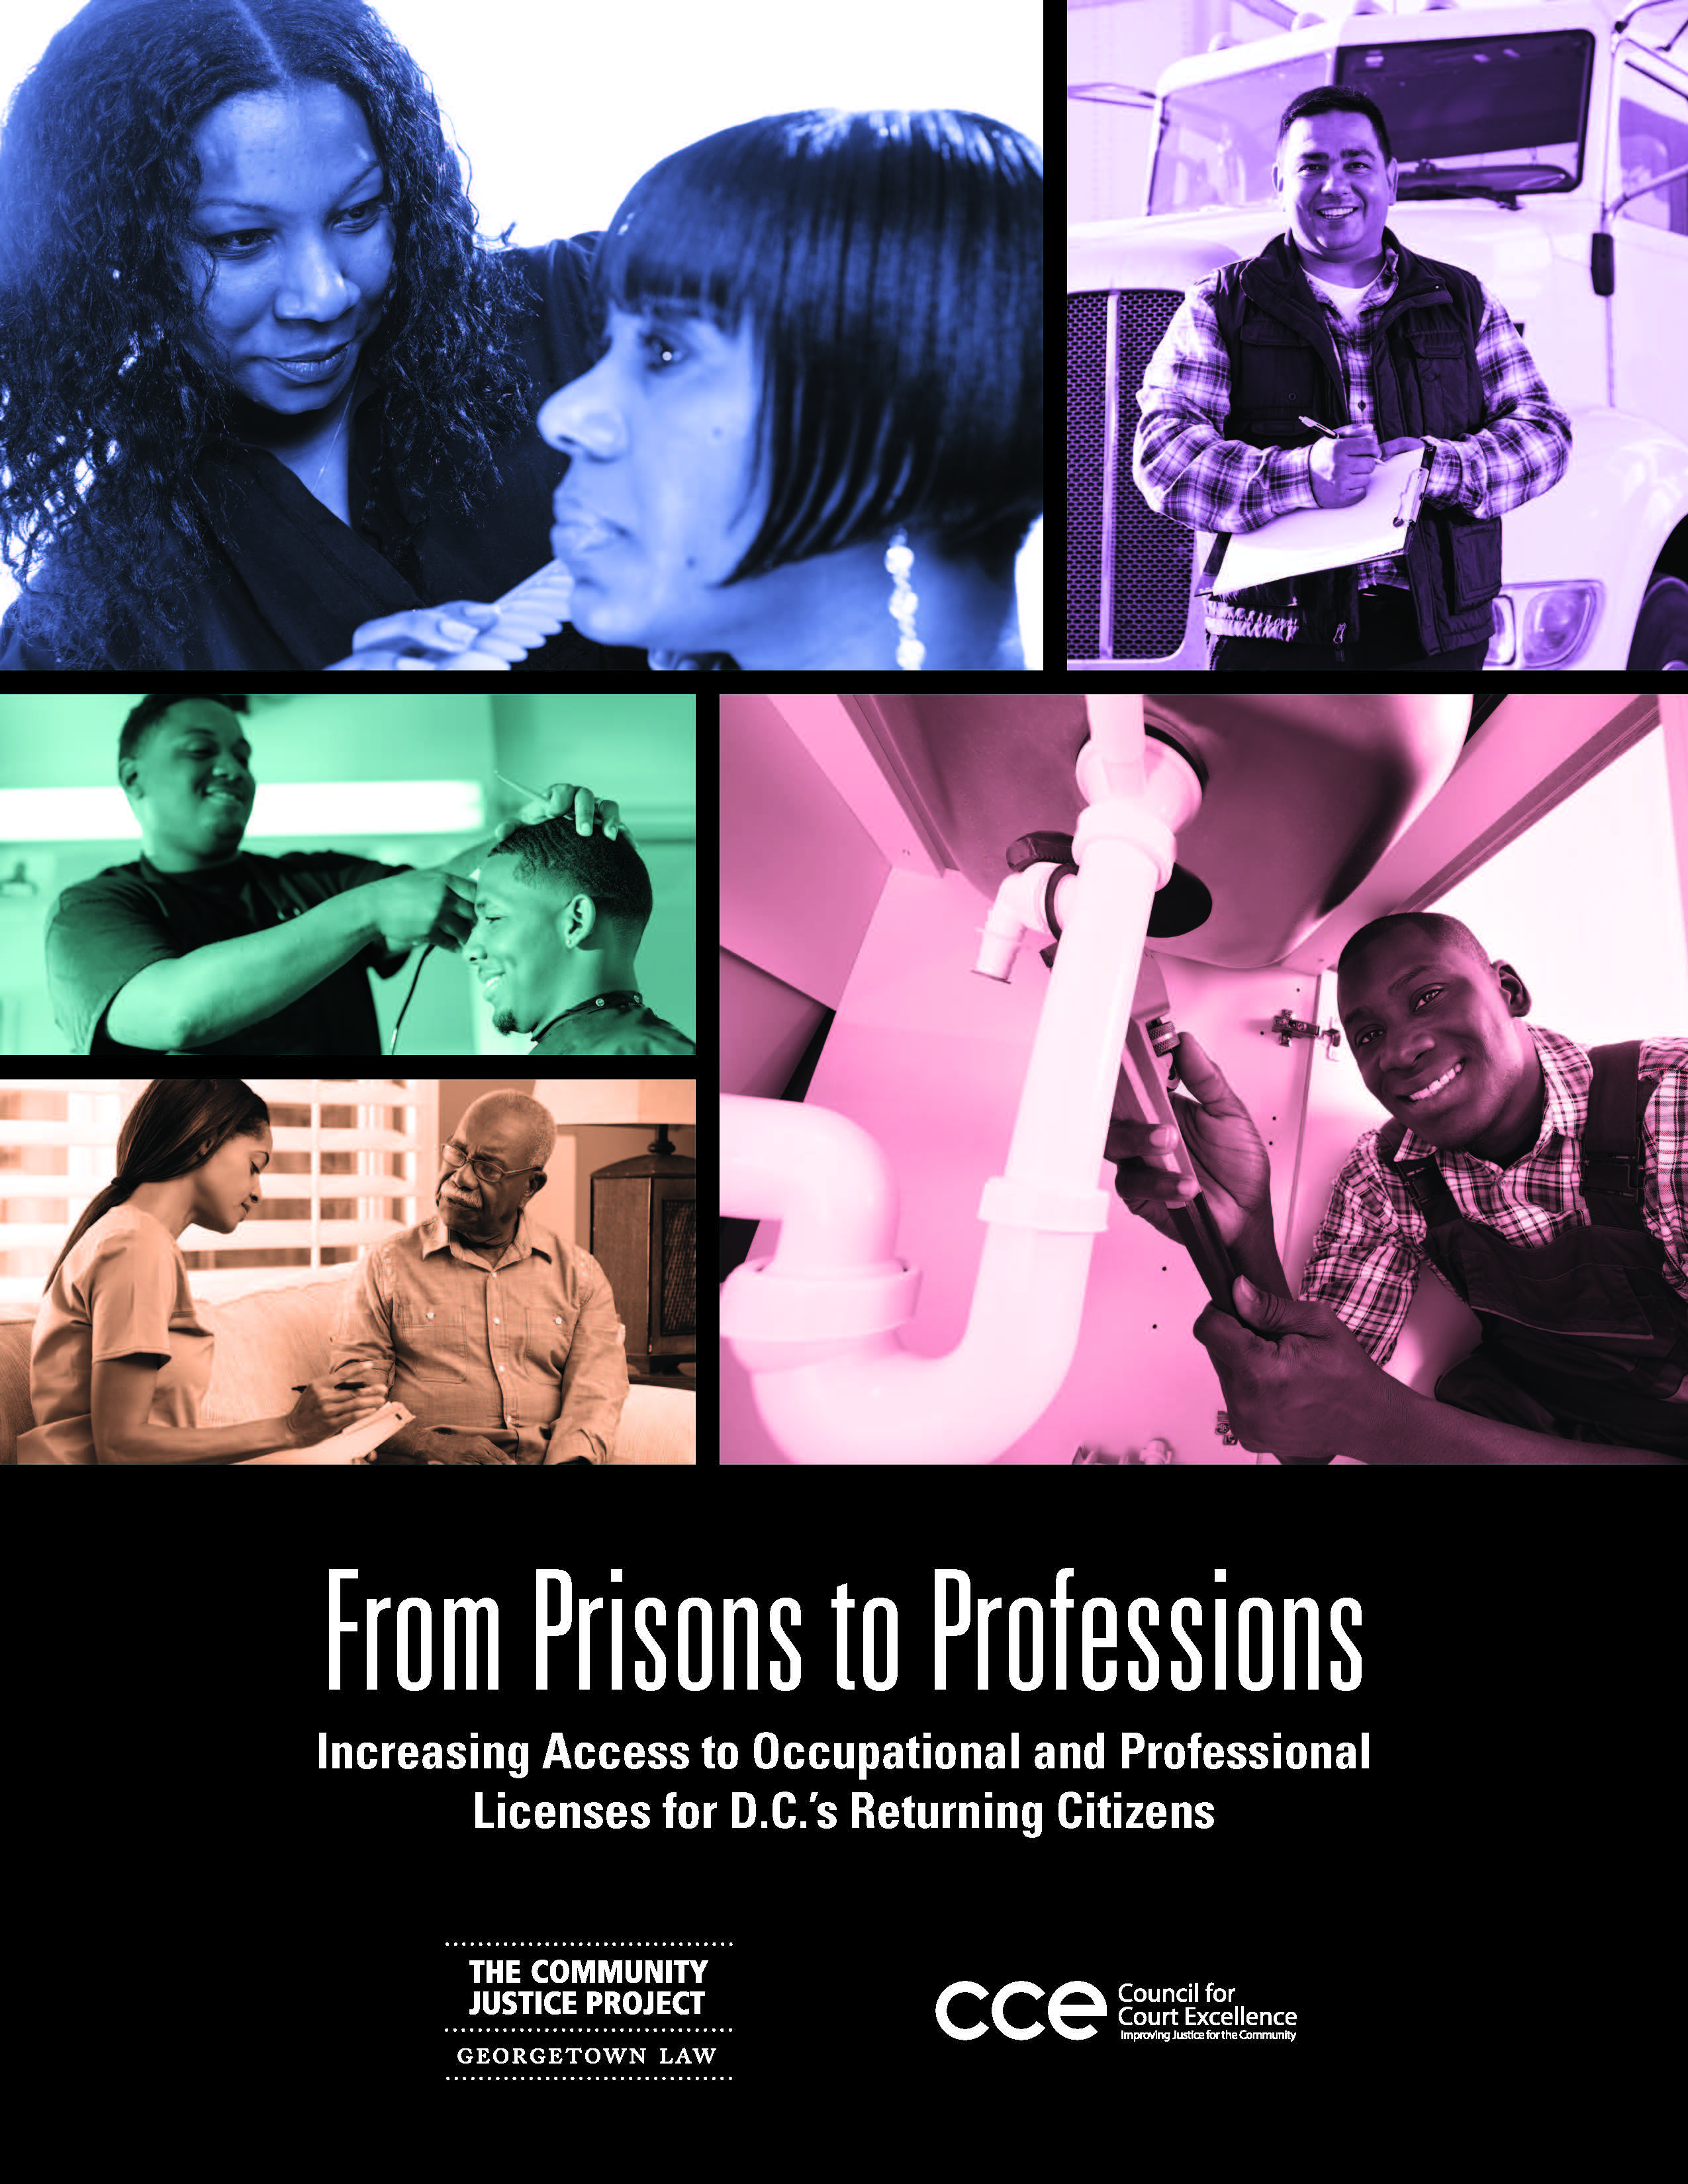 From Prisons to Professions: Increasing Access to Occupational and Professional Licenses for D.C.'s Returning Citizens